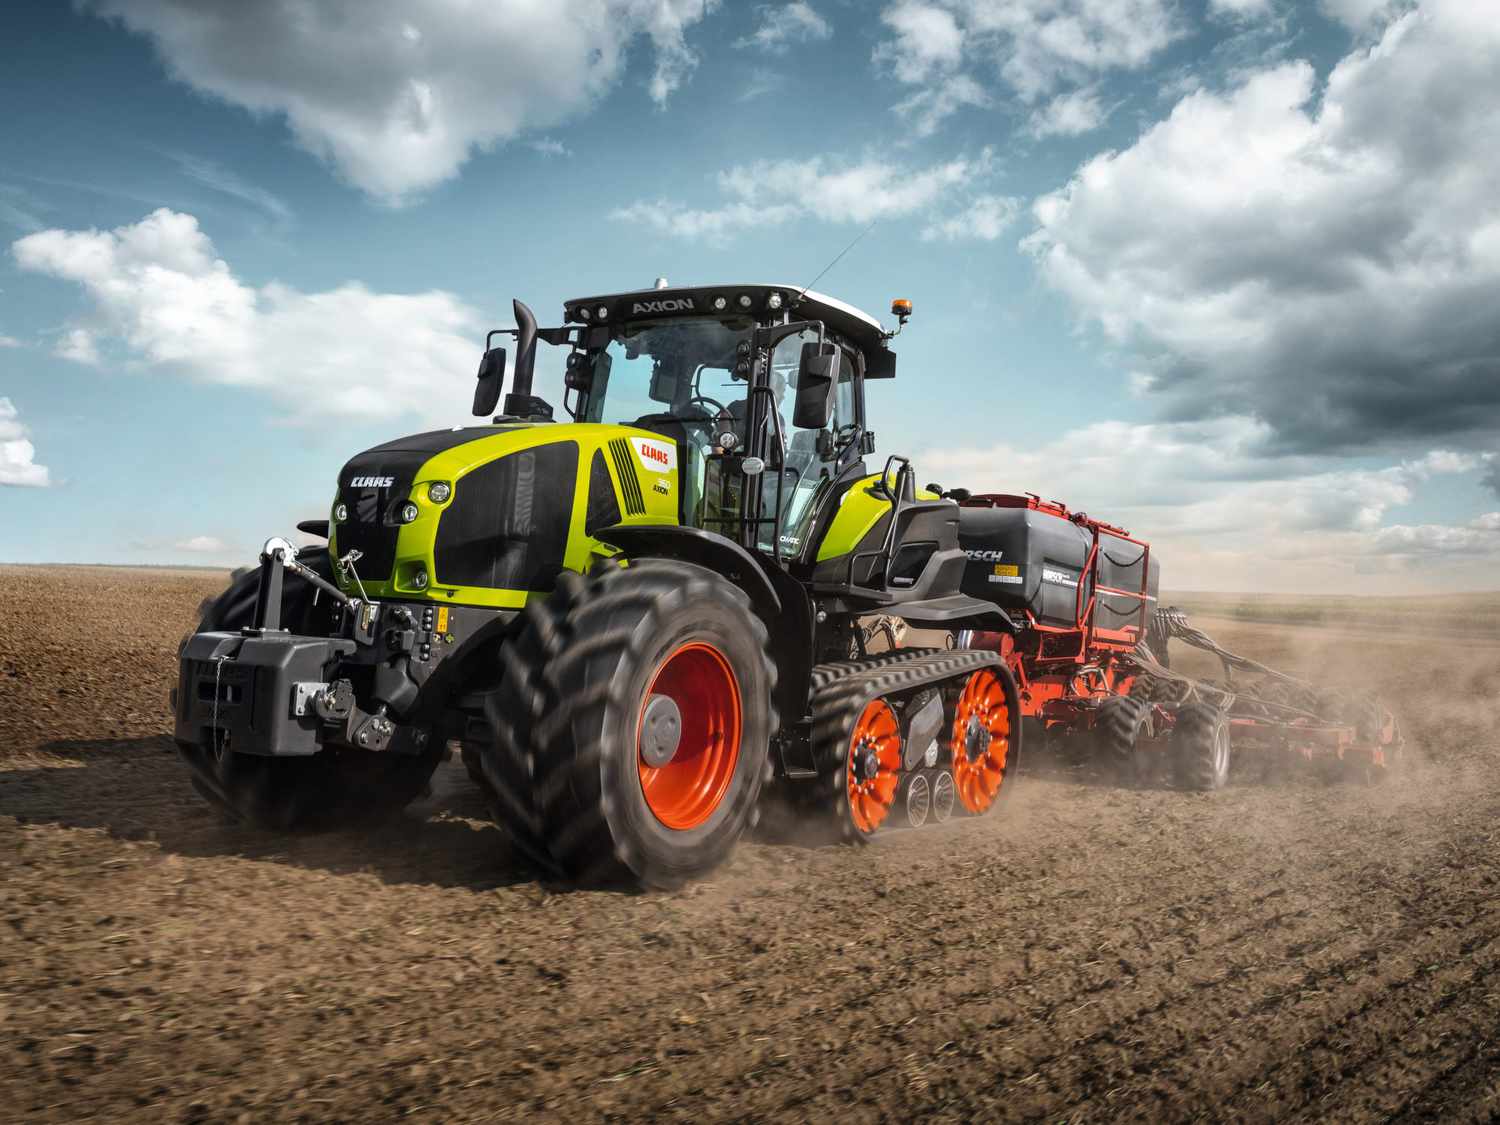 Overall Value or Price for Brand-New Tractors